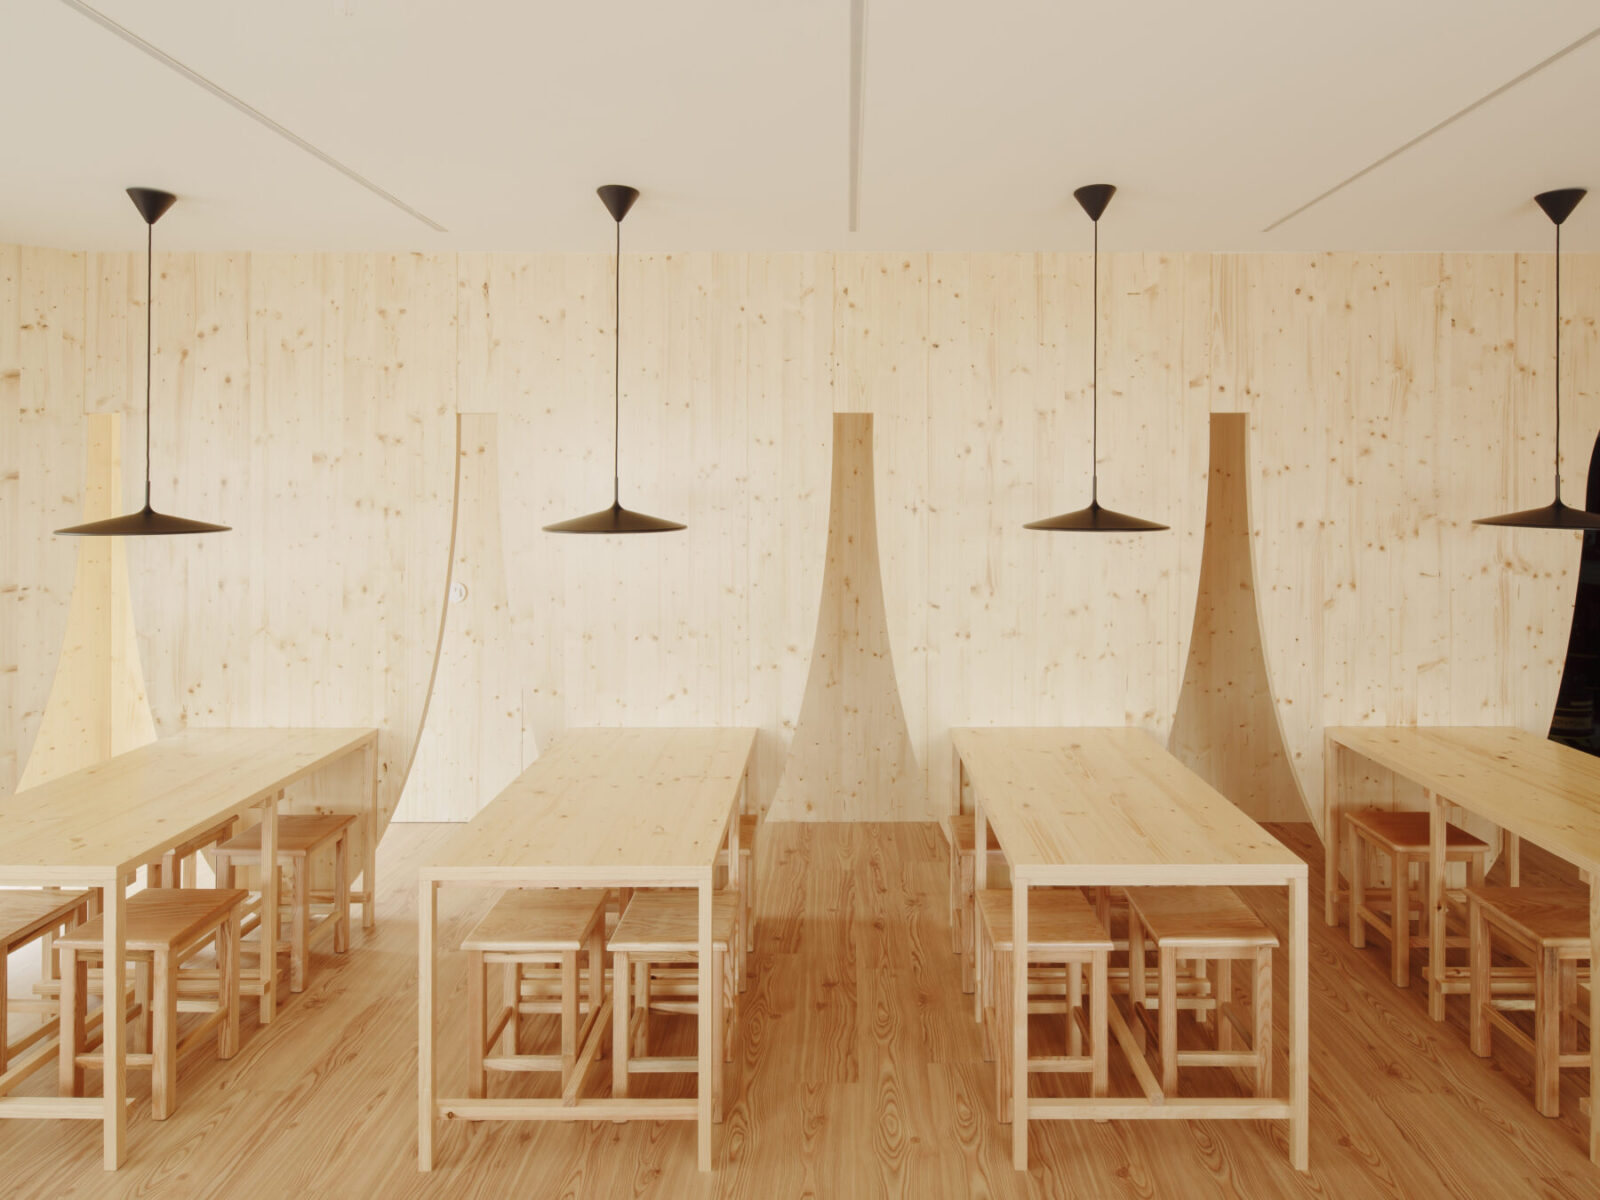 Archisearch Tarouca Gastro bar designed by Bruno Dias Arquitectura office in the heart of the village of Ansião